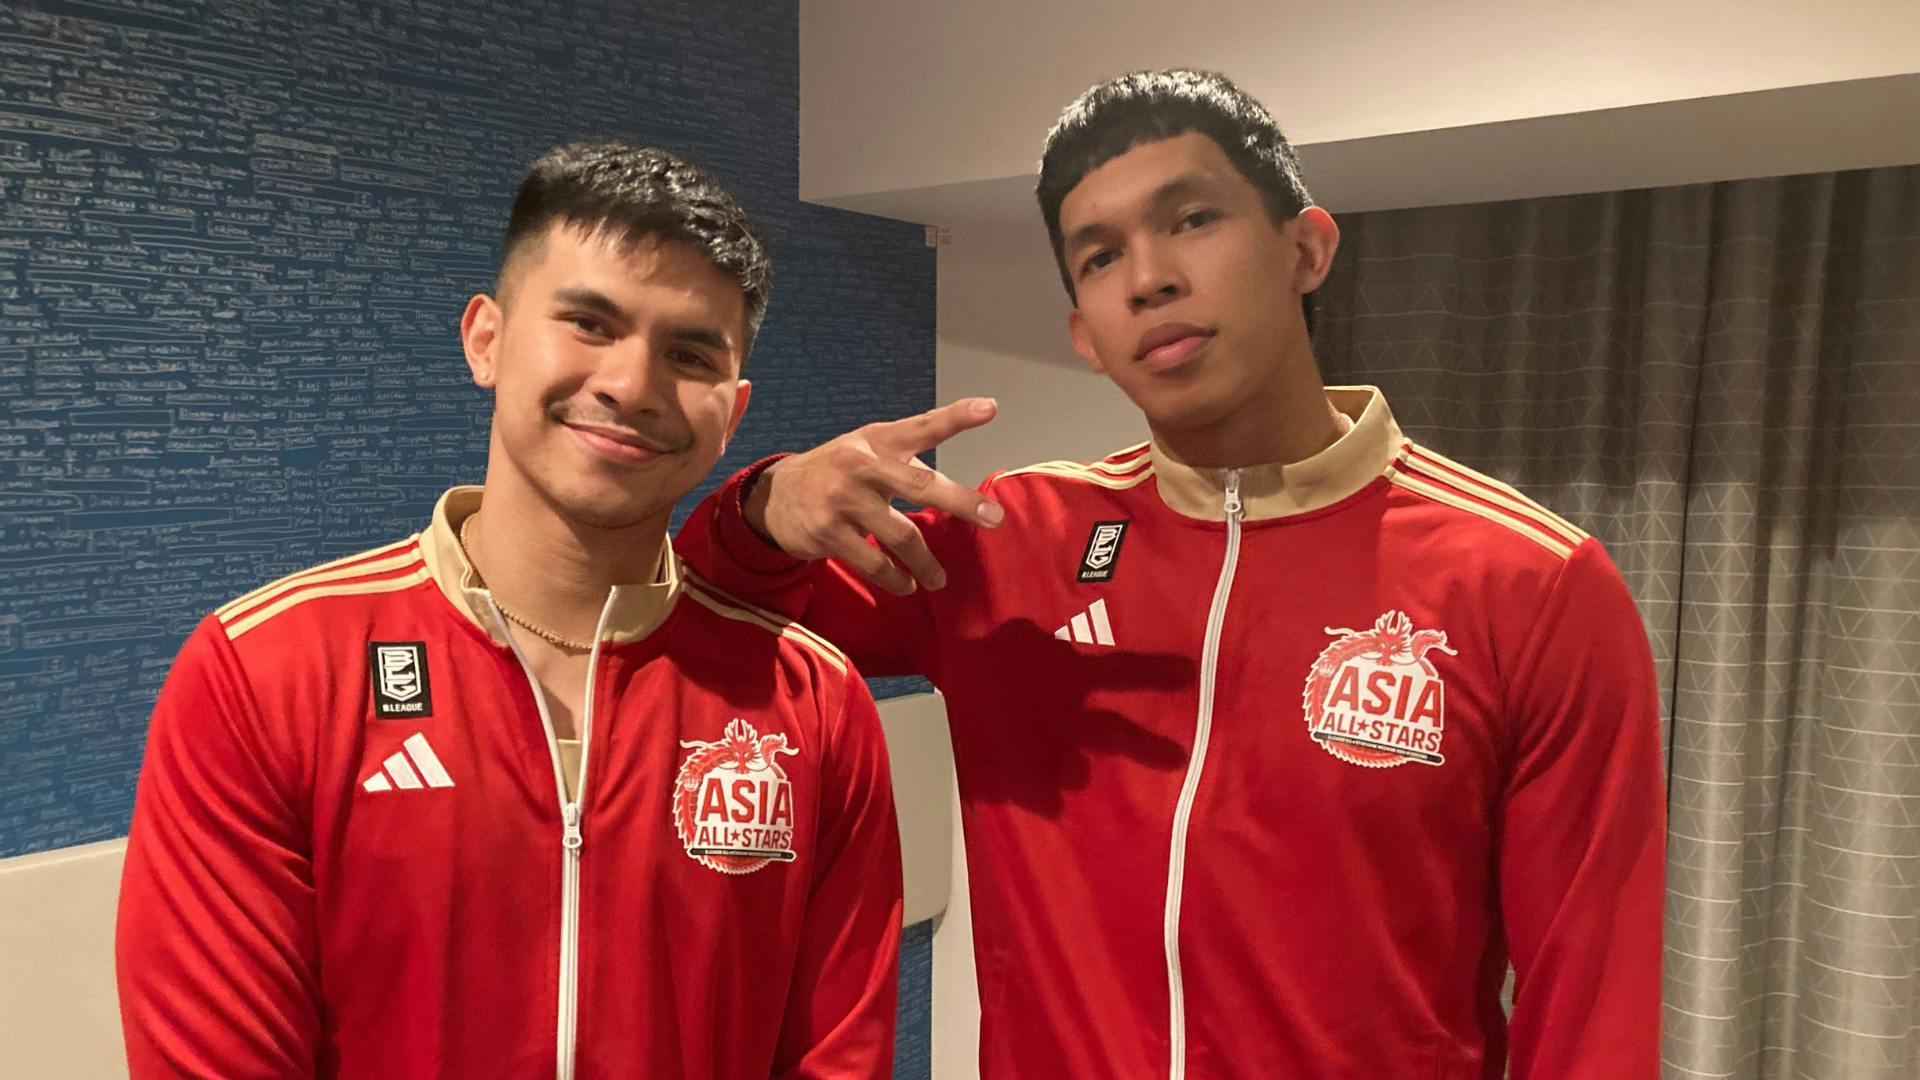 B.LEAGUE: Filipino hoopers let loose during kulitan moments for All-Star Weekend